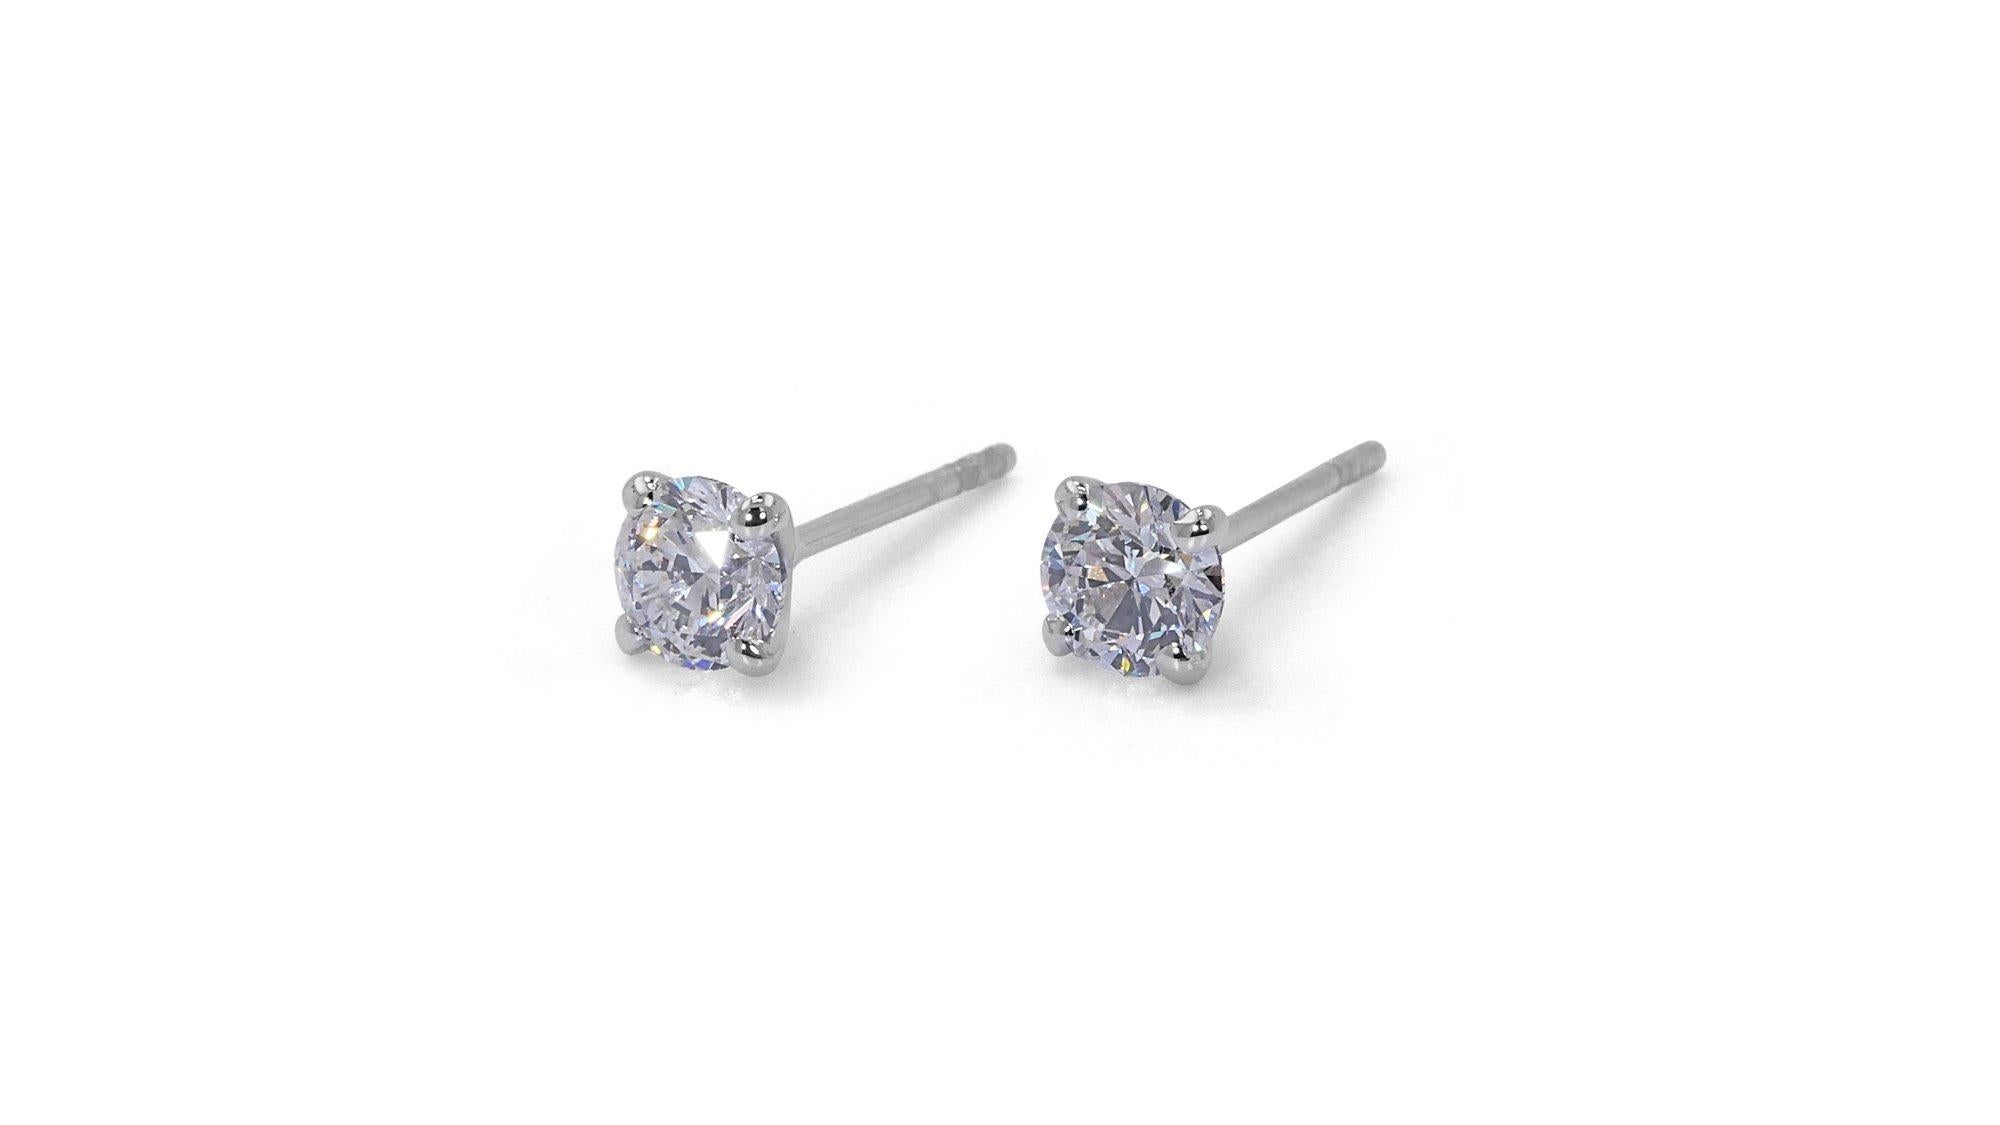 Stunning 18k White Gold Stud Earrings with 0.80 Ct Natural Diamonds GIA Cert For Sale 2